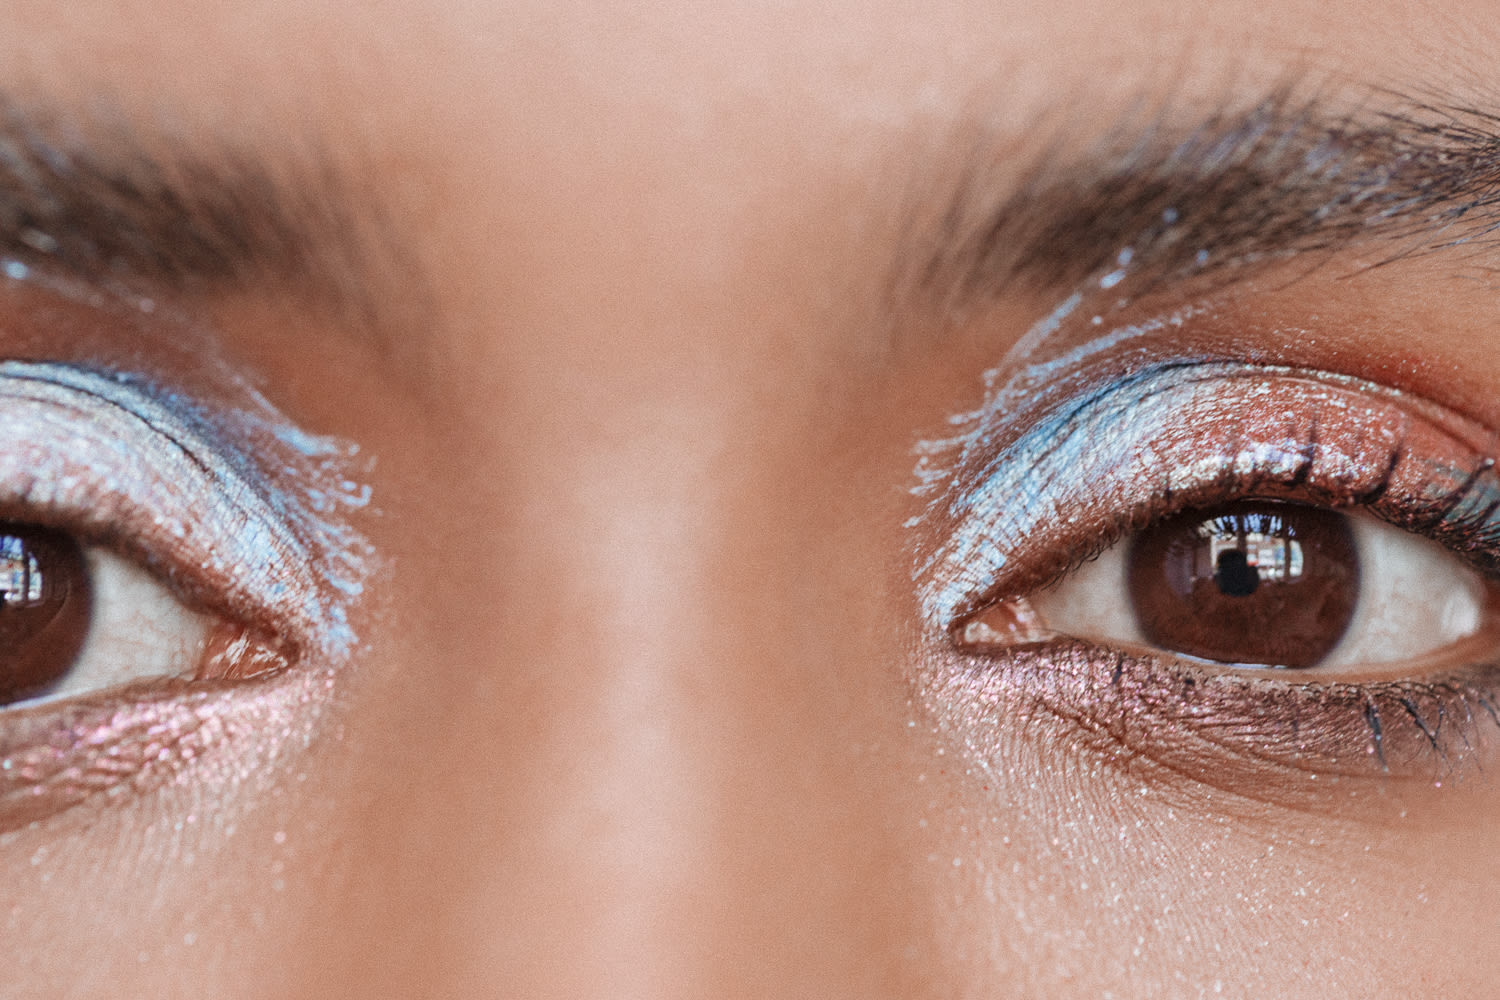 Eight Makeup Artists On Their Favorite Blue Eyeshadow | Into The Gloss